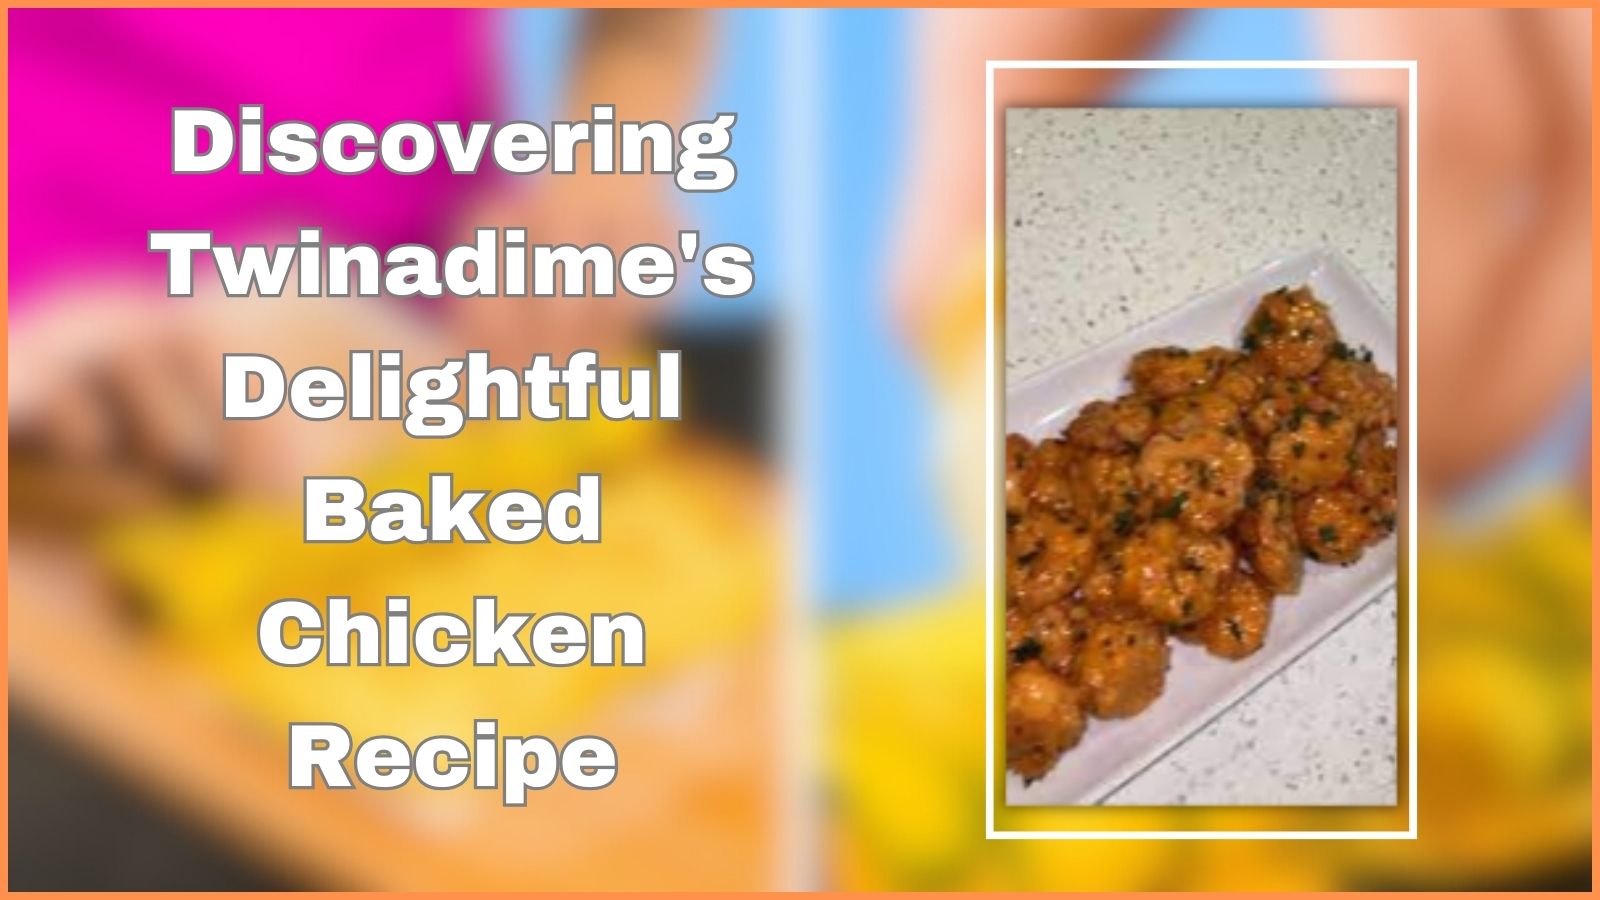 Discovering Twinadime’s Delightful Baked Chicken Recipe